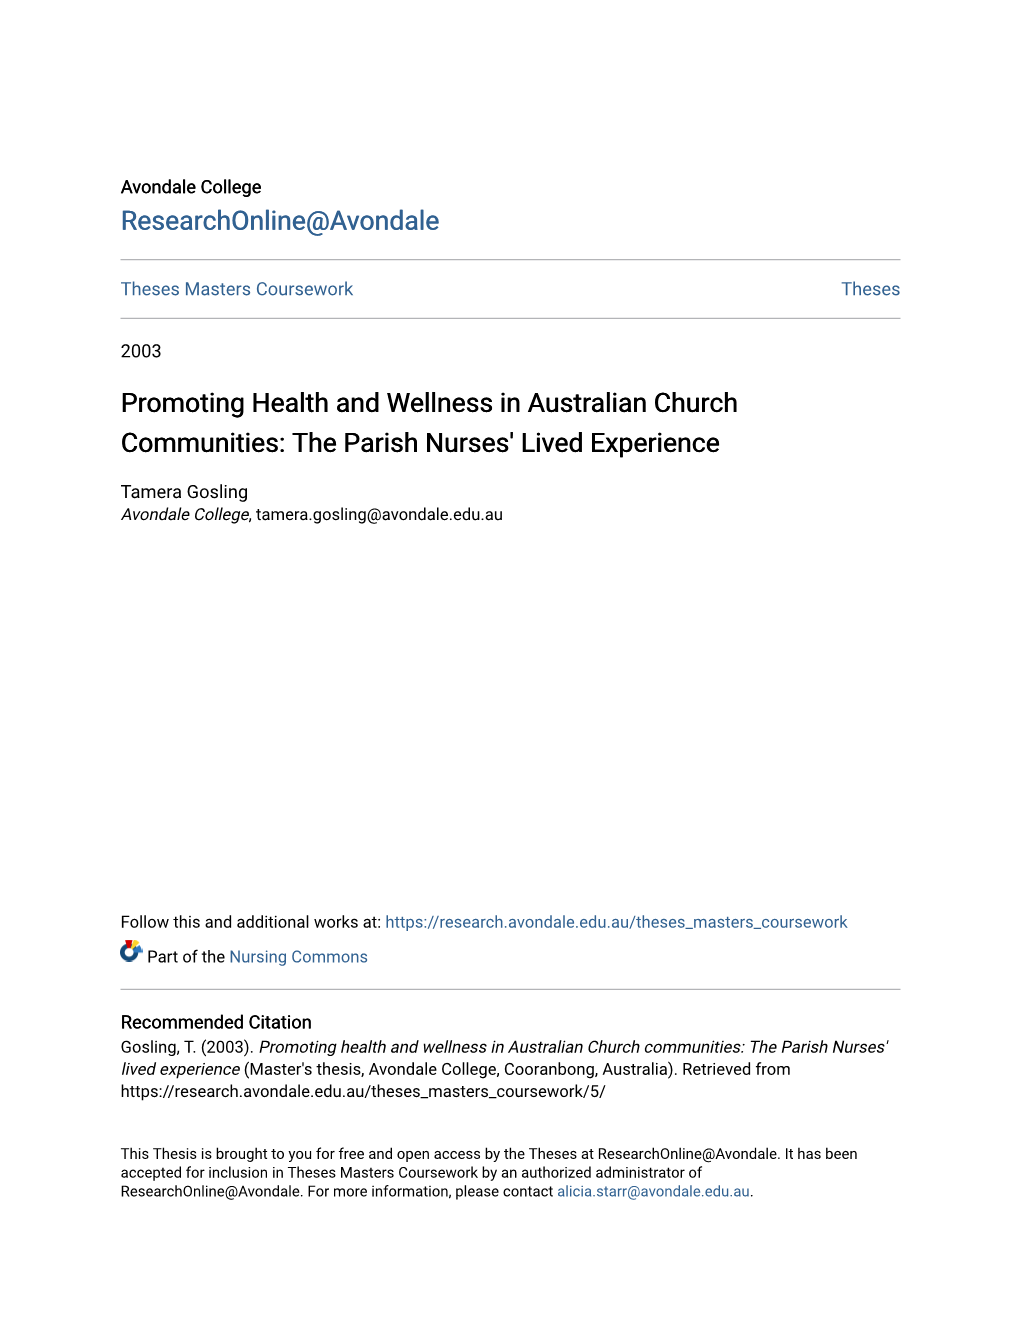 Promoting Health and Wellness in Australian Church Communities: the Parish Nurses' Lived Experience